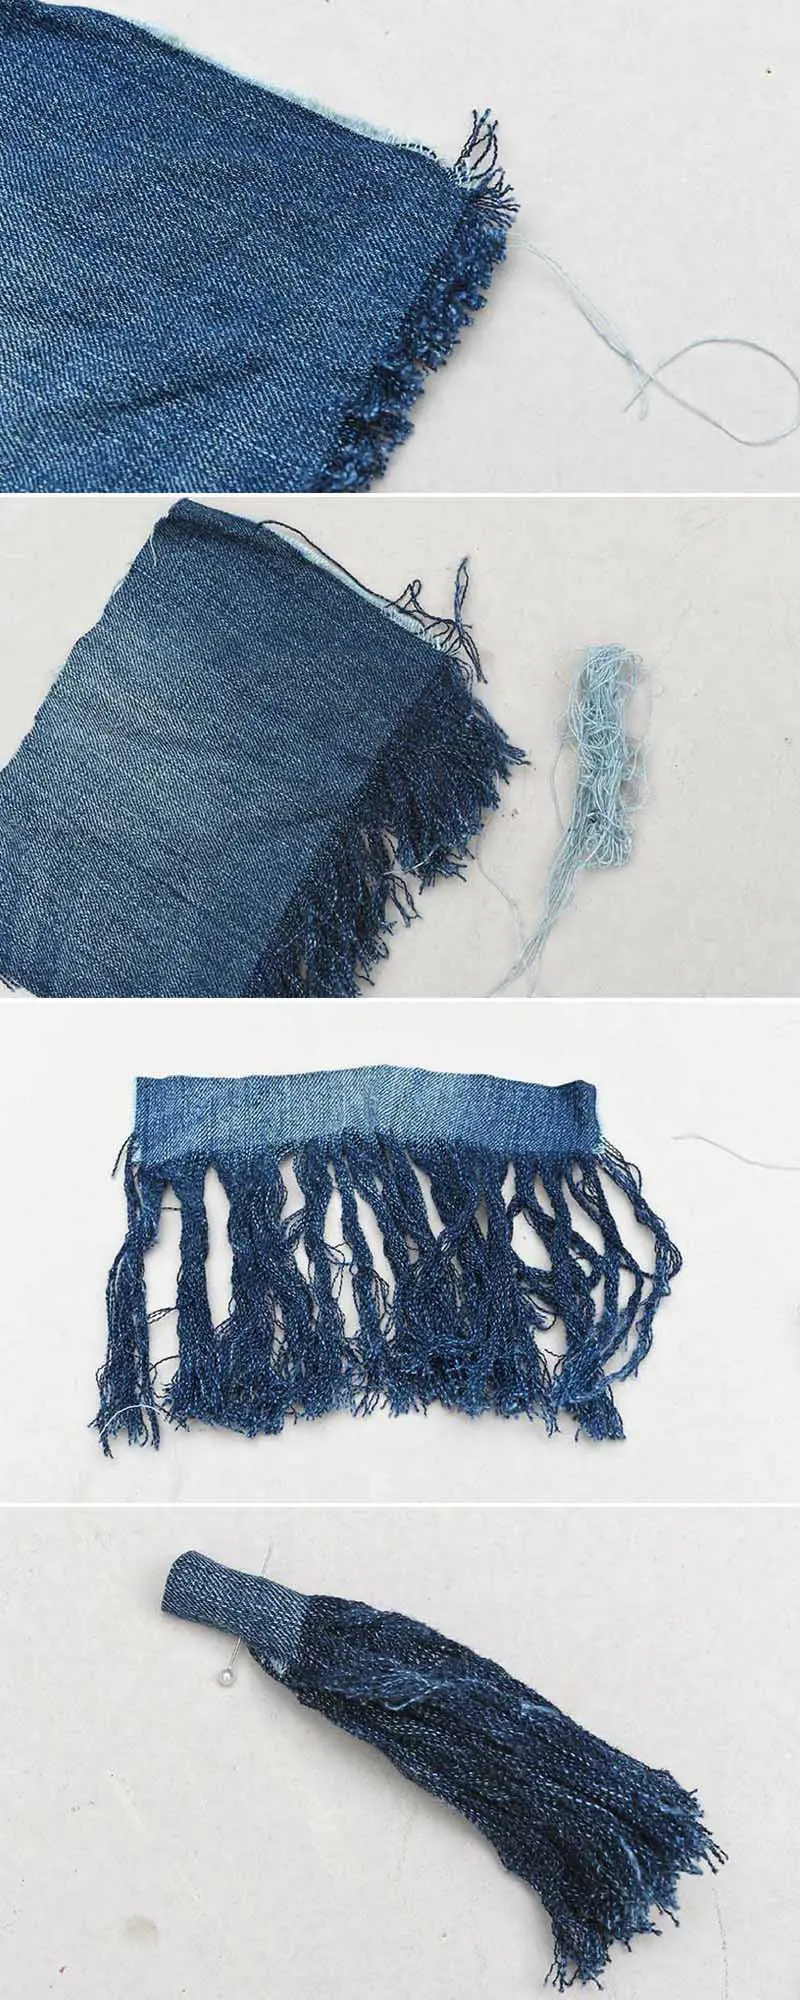 How to make tassels from old jeans